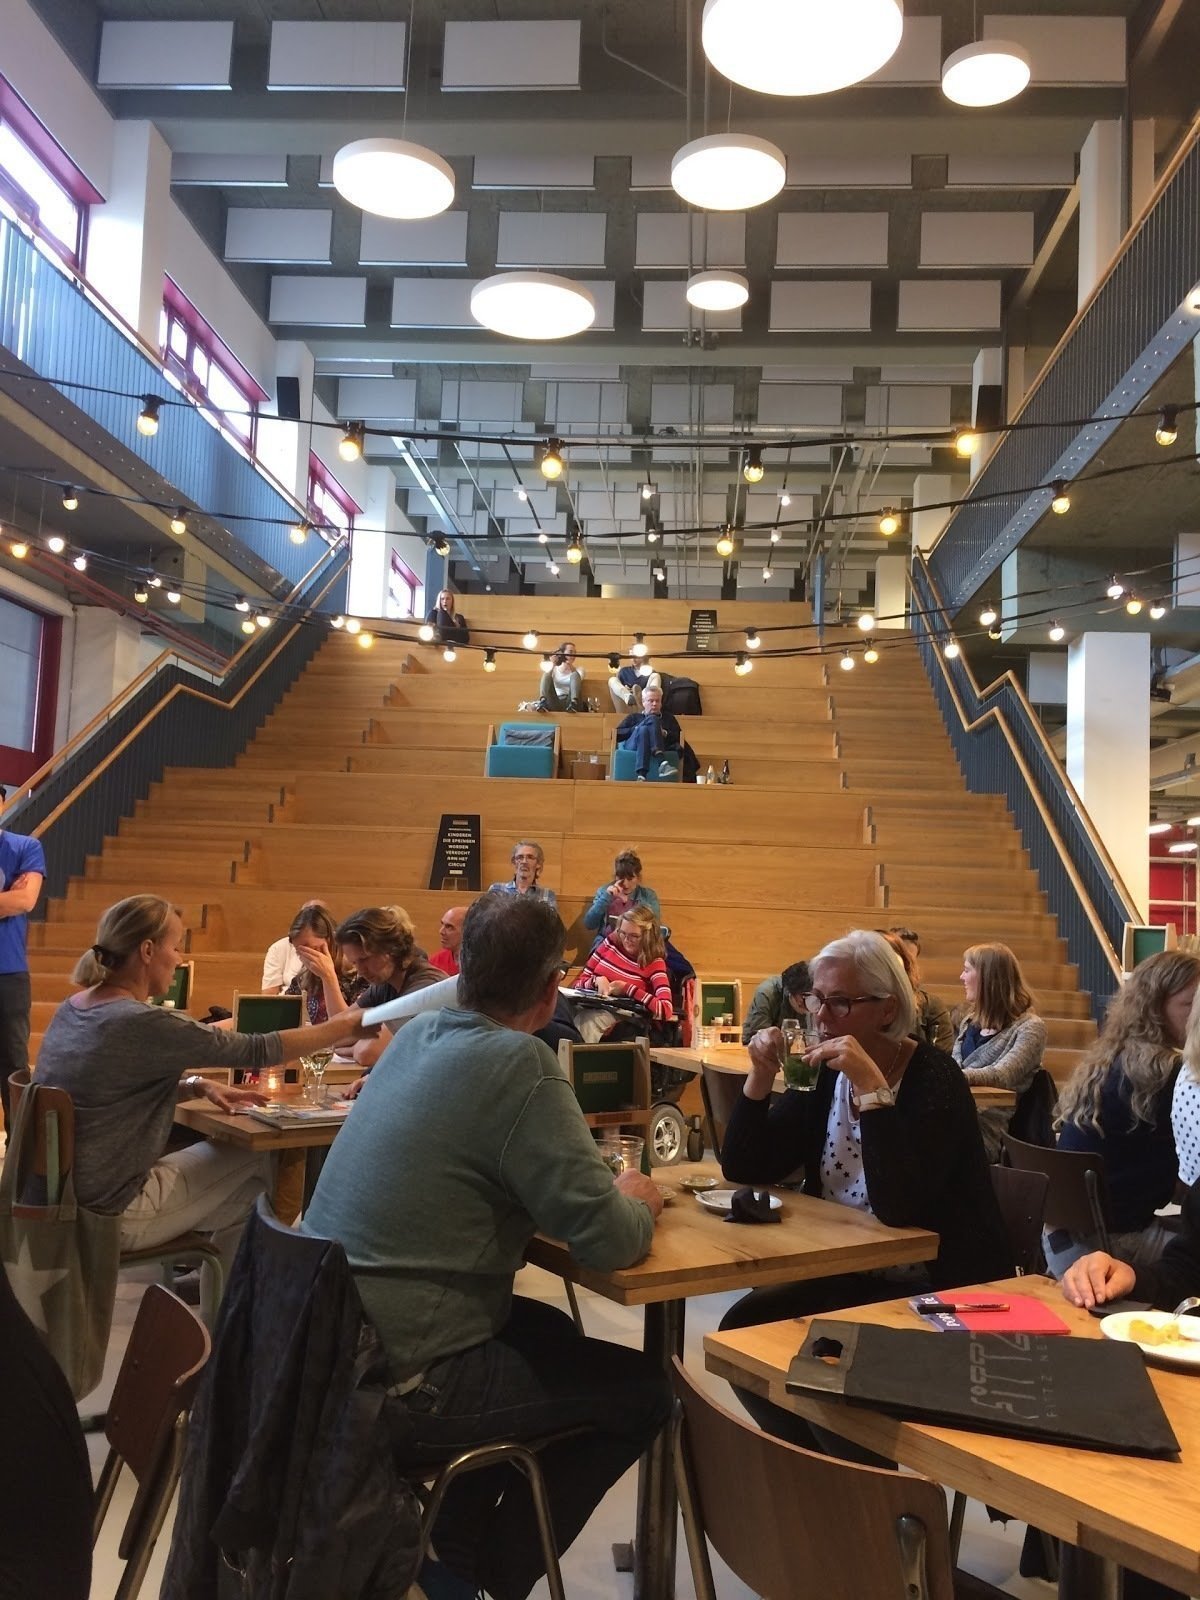 Chocolate Factory Library Gouda: A Work-Friendly Place in Gouda